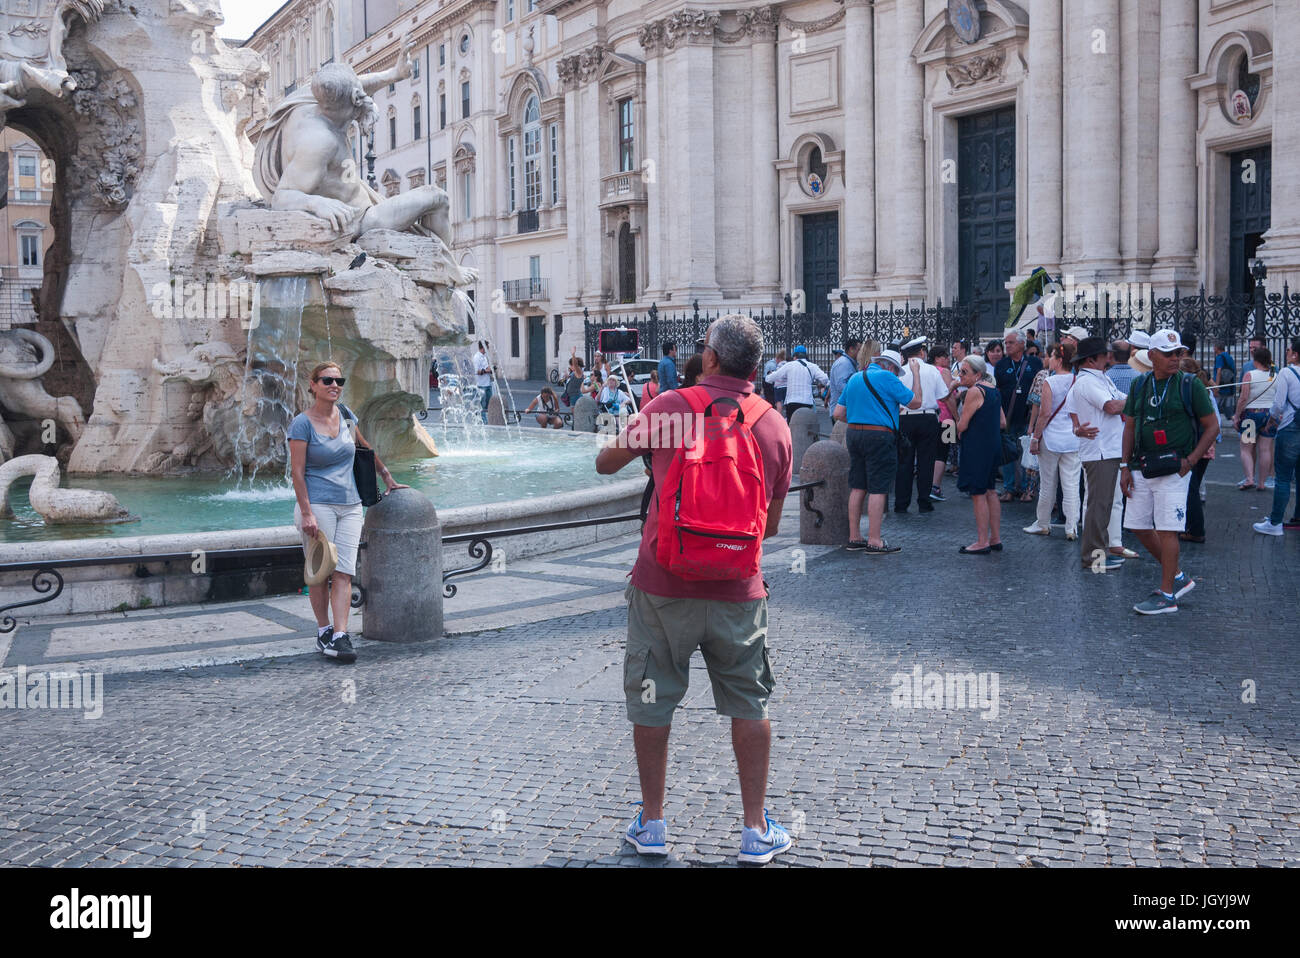 Rome, Italy 2017 - A man takes a photo of a woman in Piazza Navona Stock Photo